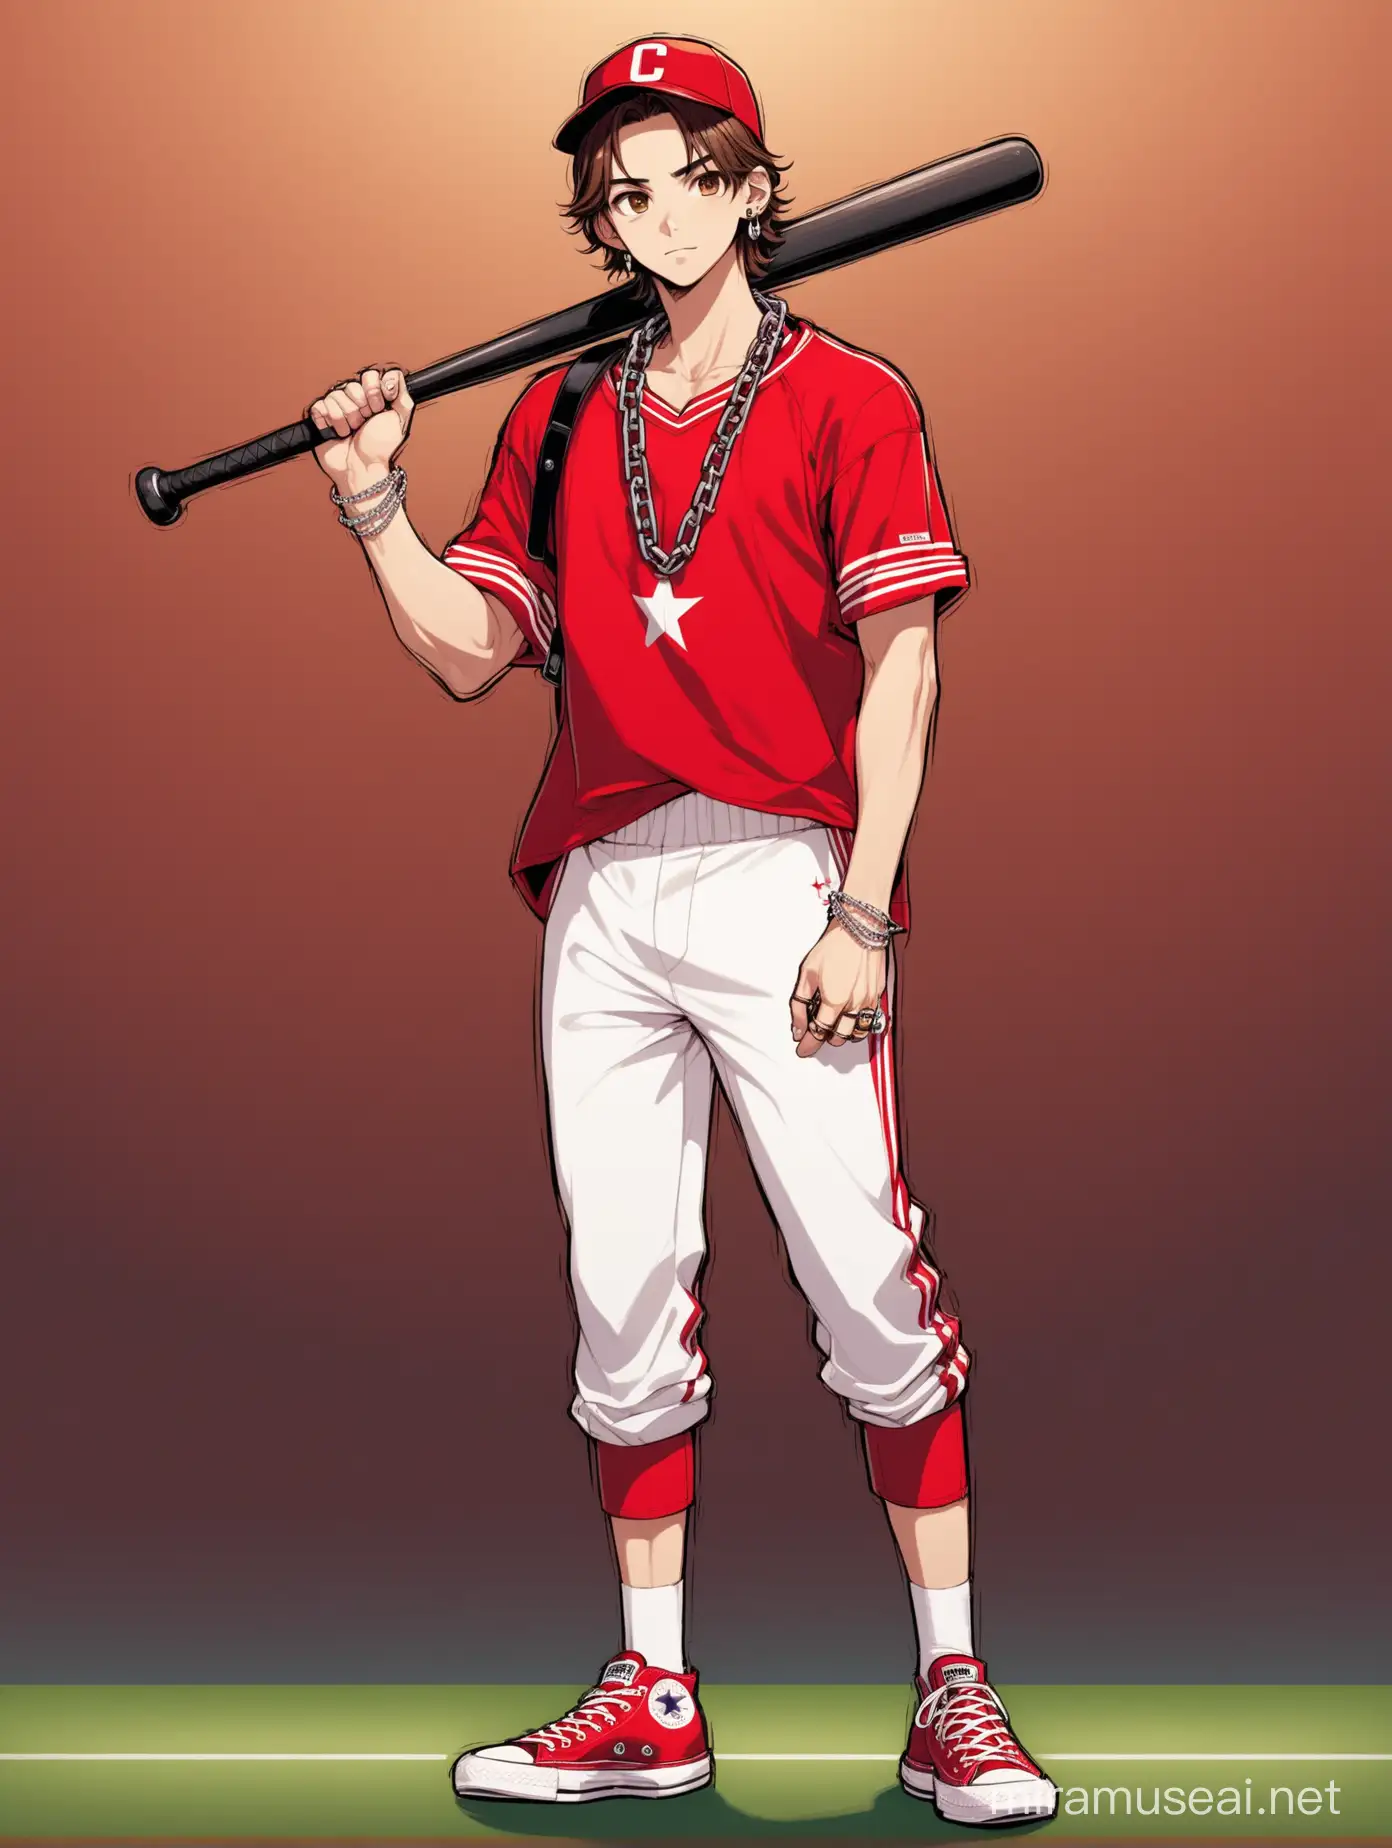 Stylish Young Man in Red Sports Attire with Baseball Bat